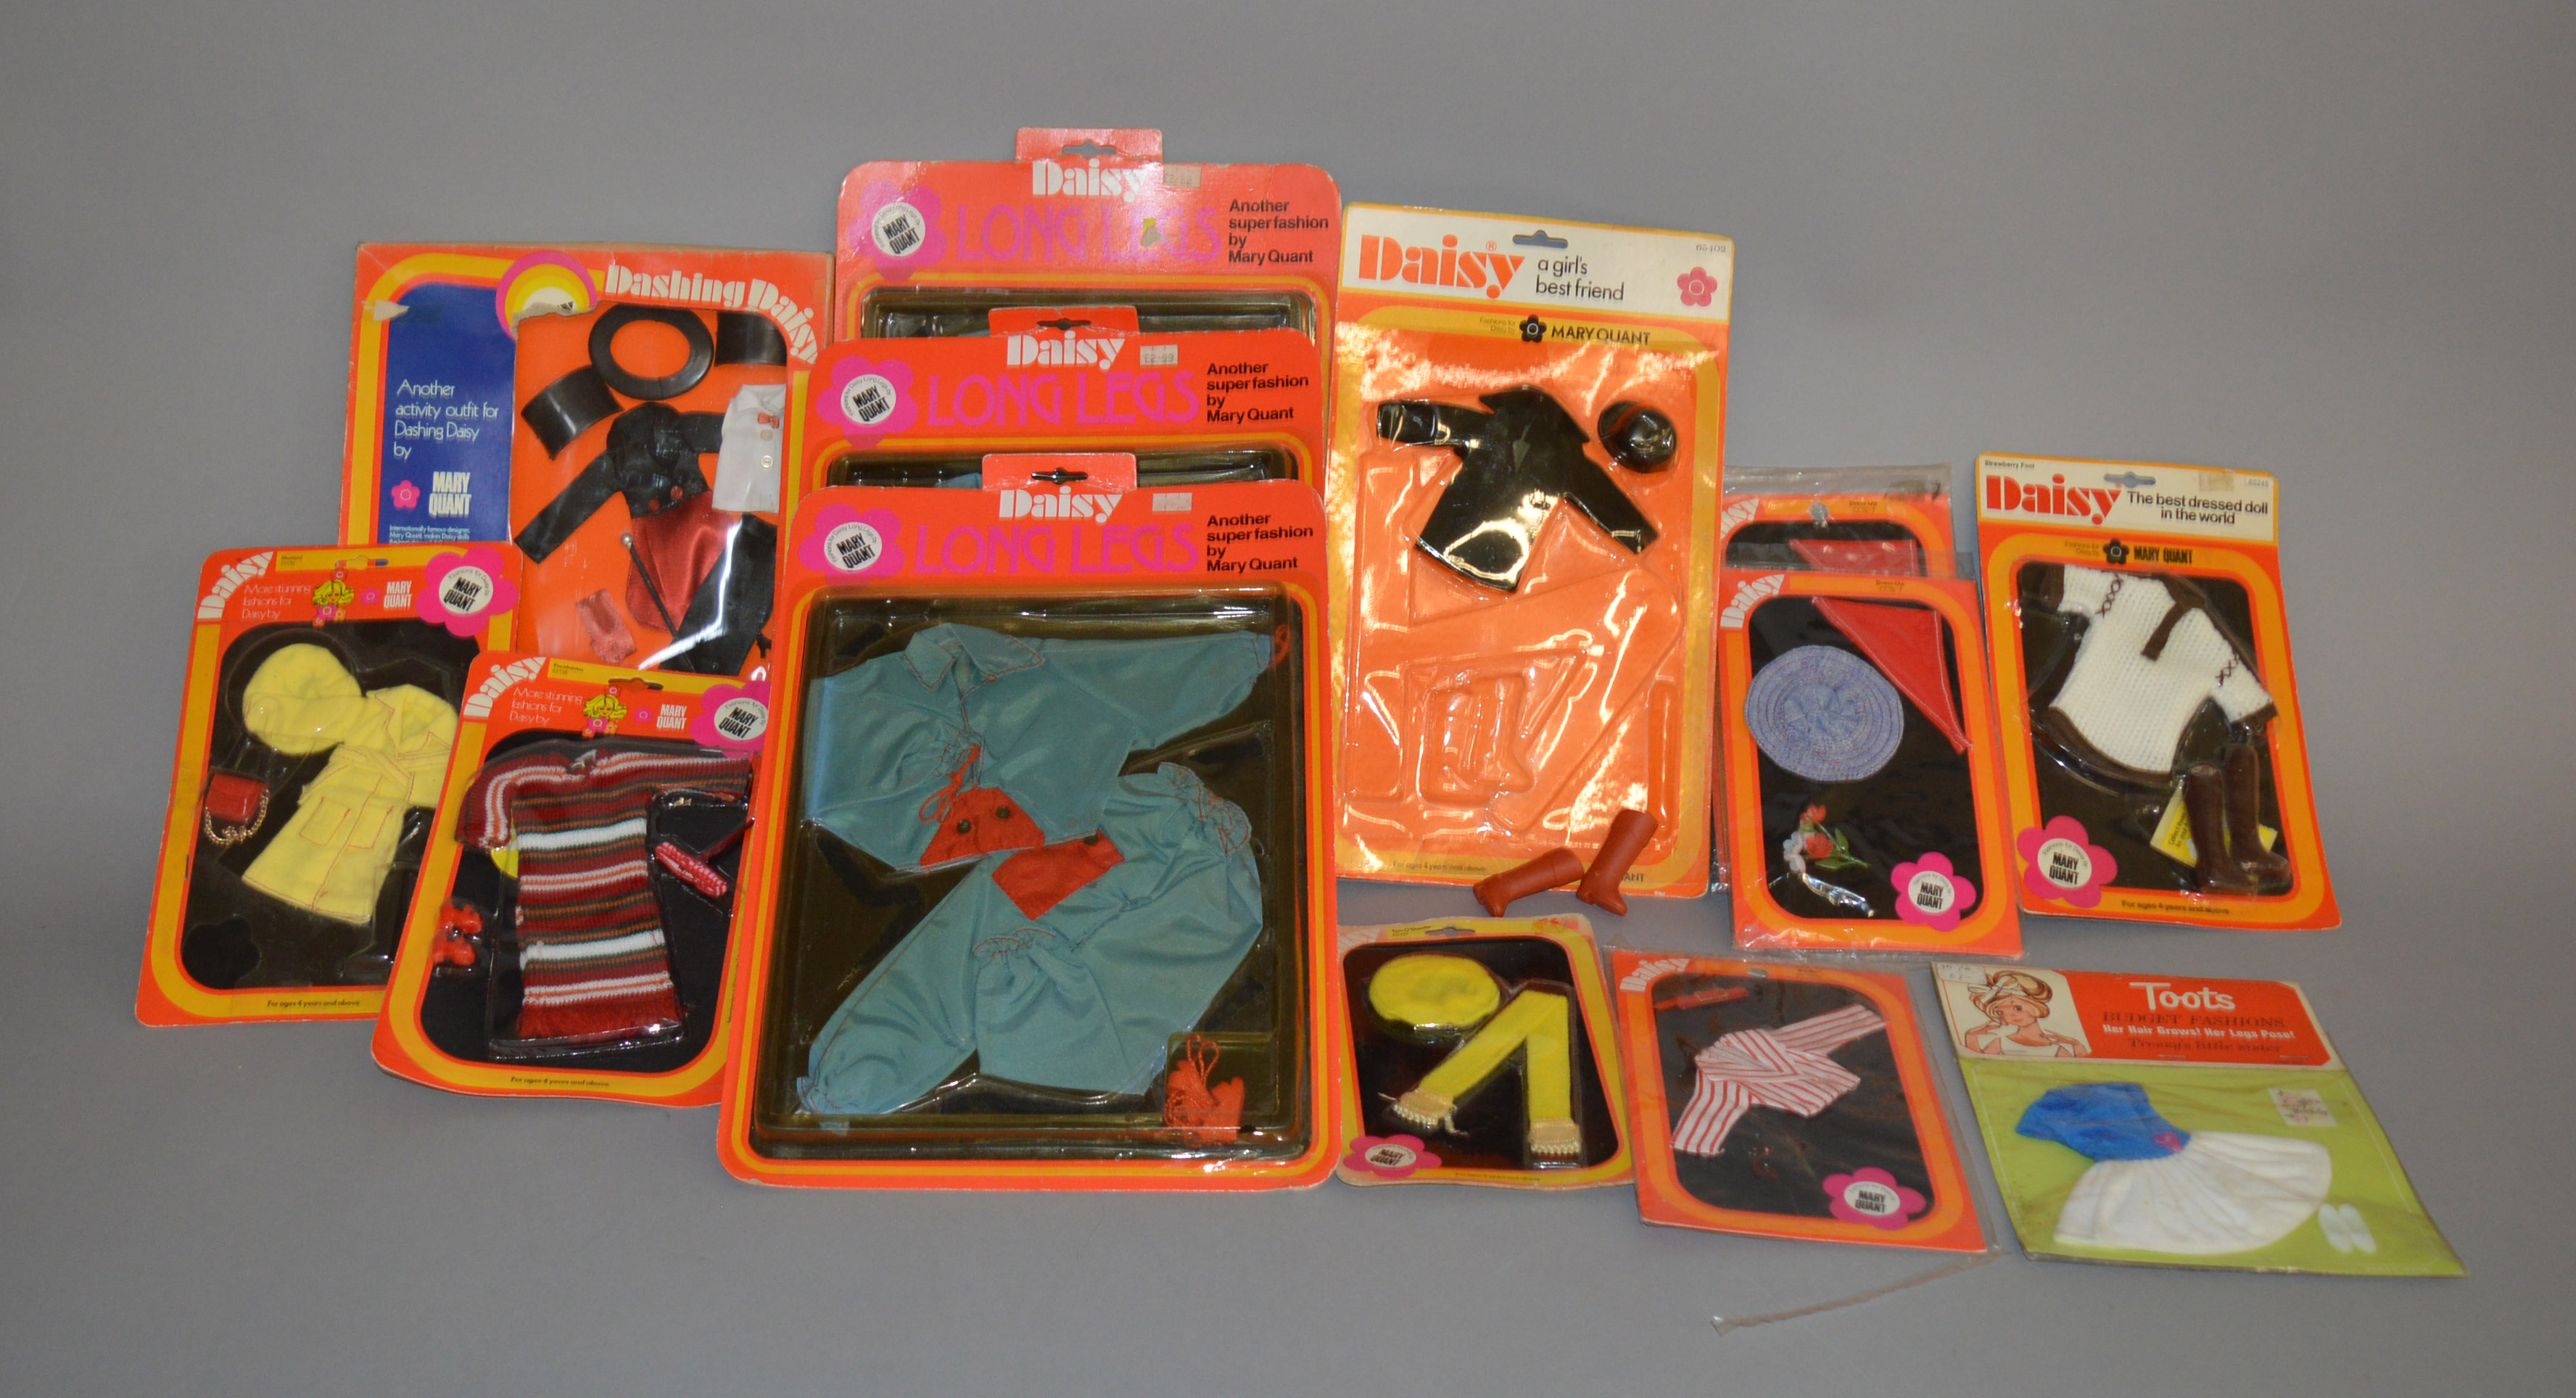 EX-SHOP STOCK: Twelve Flair Toys Mary Quant Daisy doll Clothing Accessory sets together with a